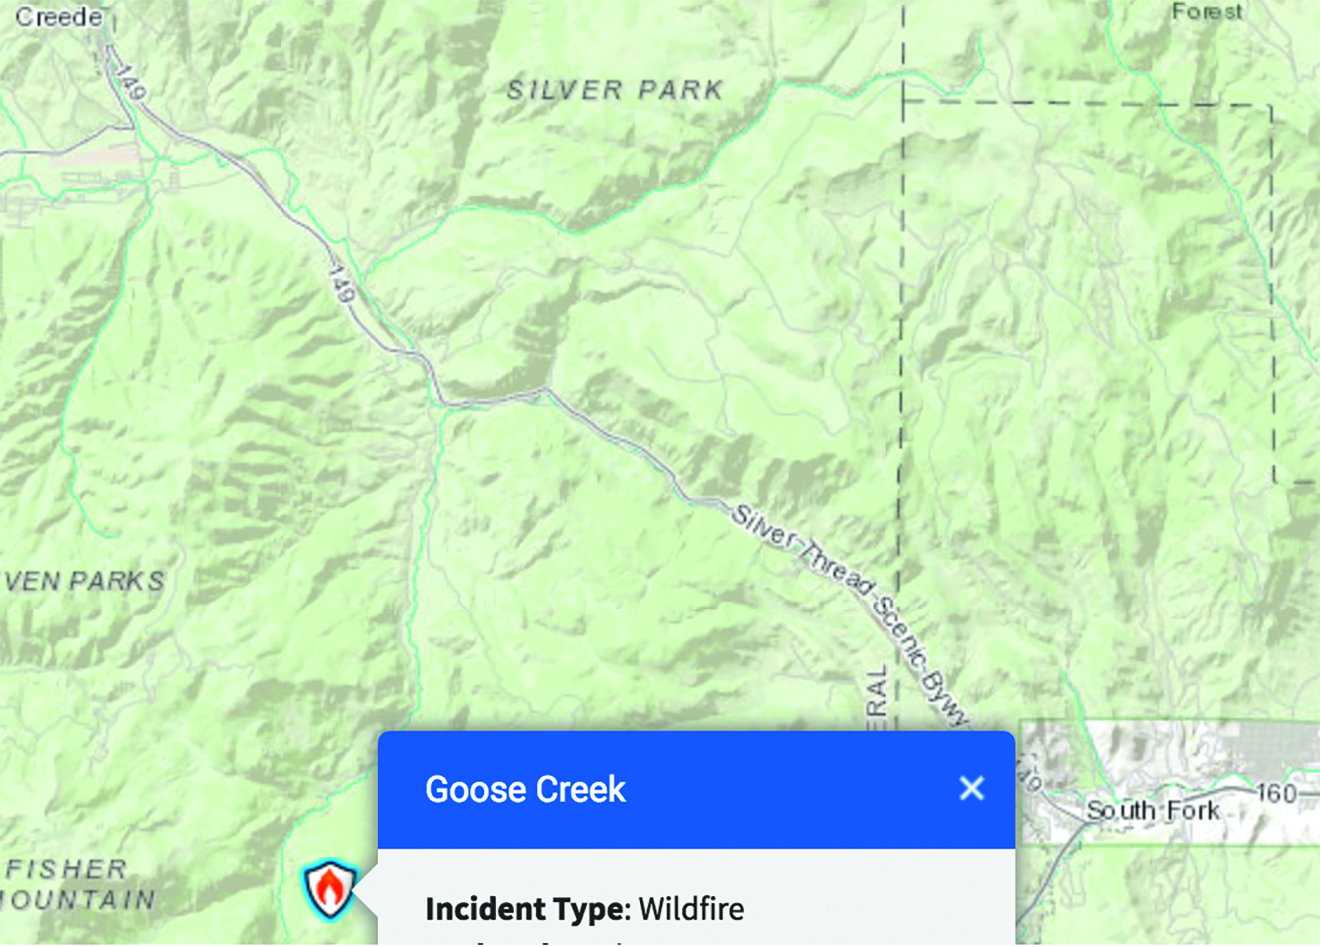 Goose Creek Fire Map Courtesy RGNF